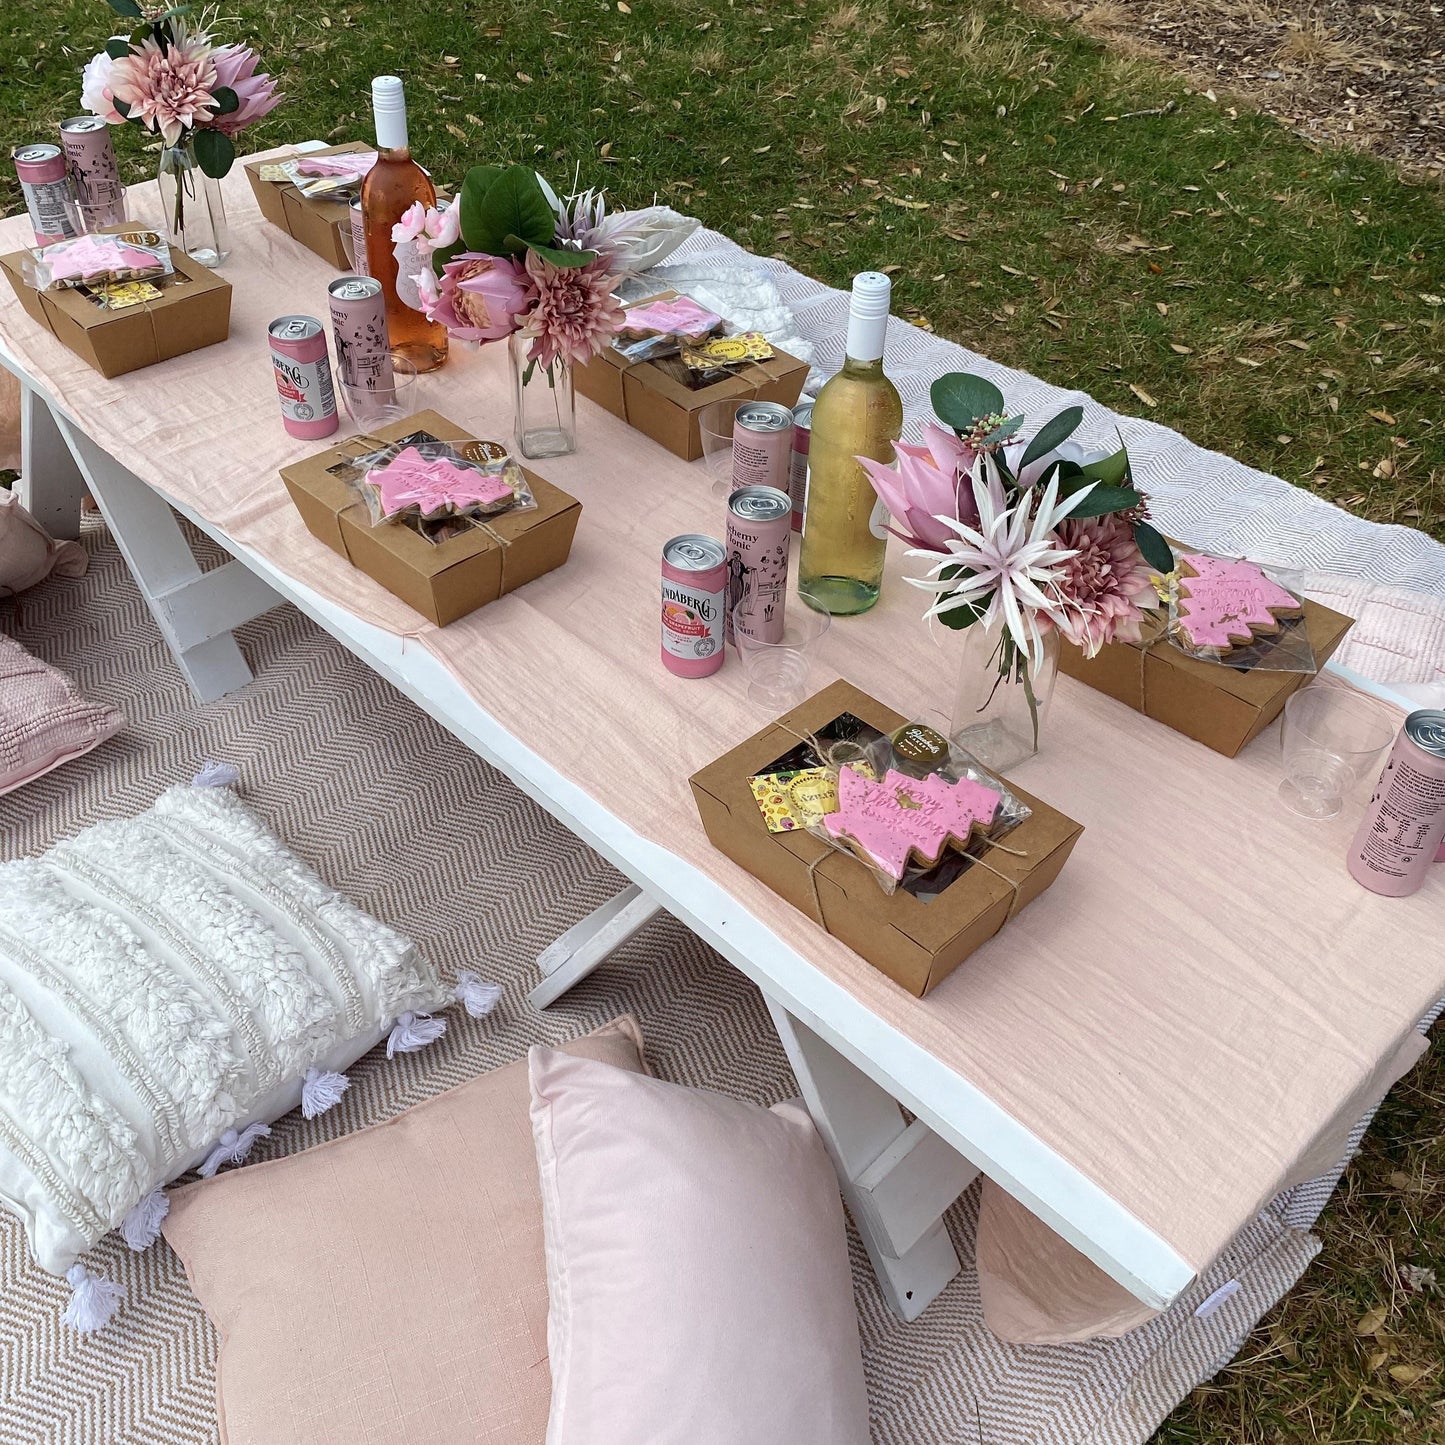 Low picnic table with food boxes, drinks and florals 